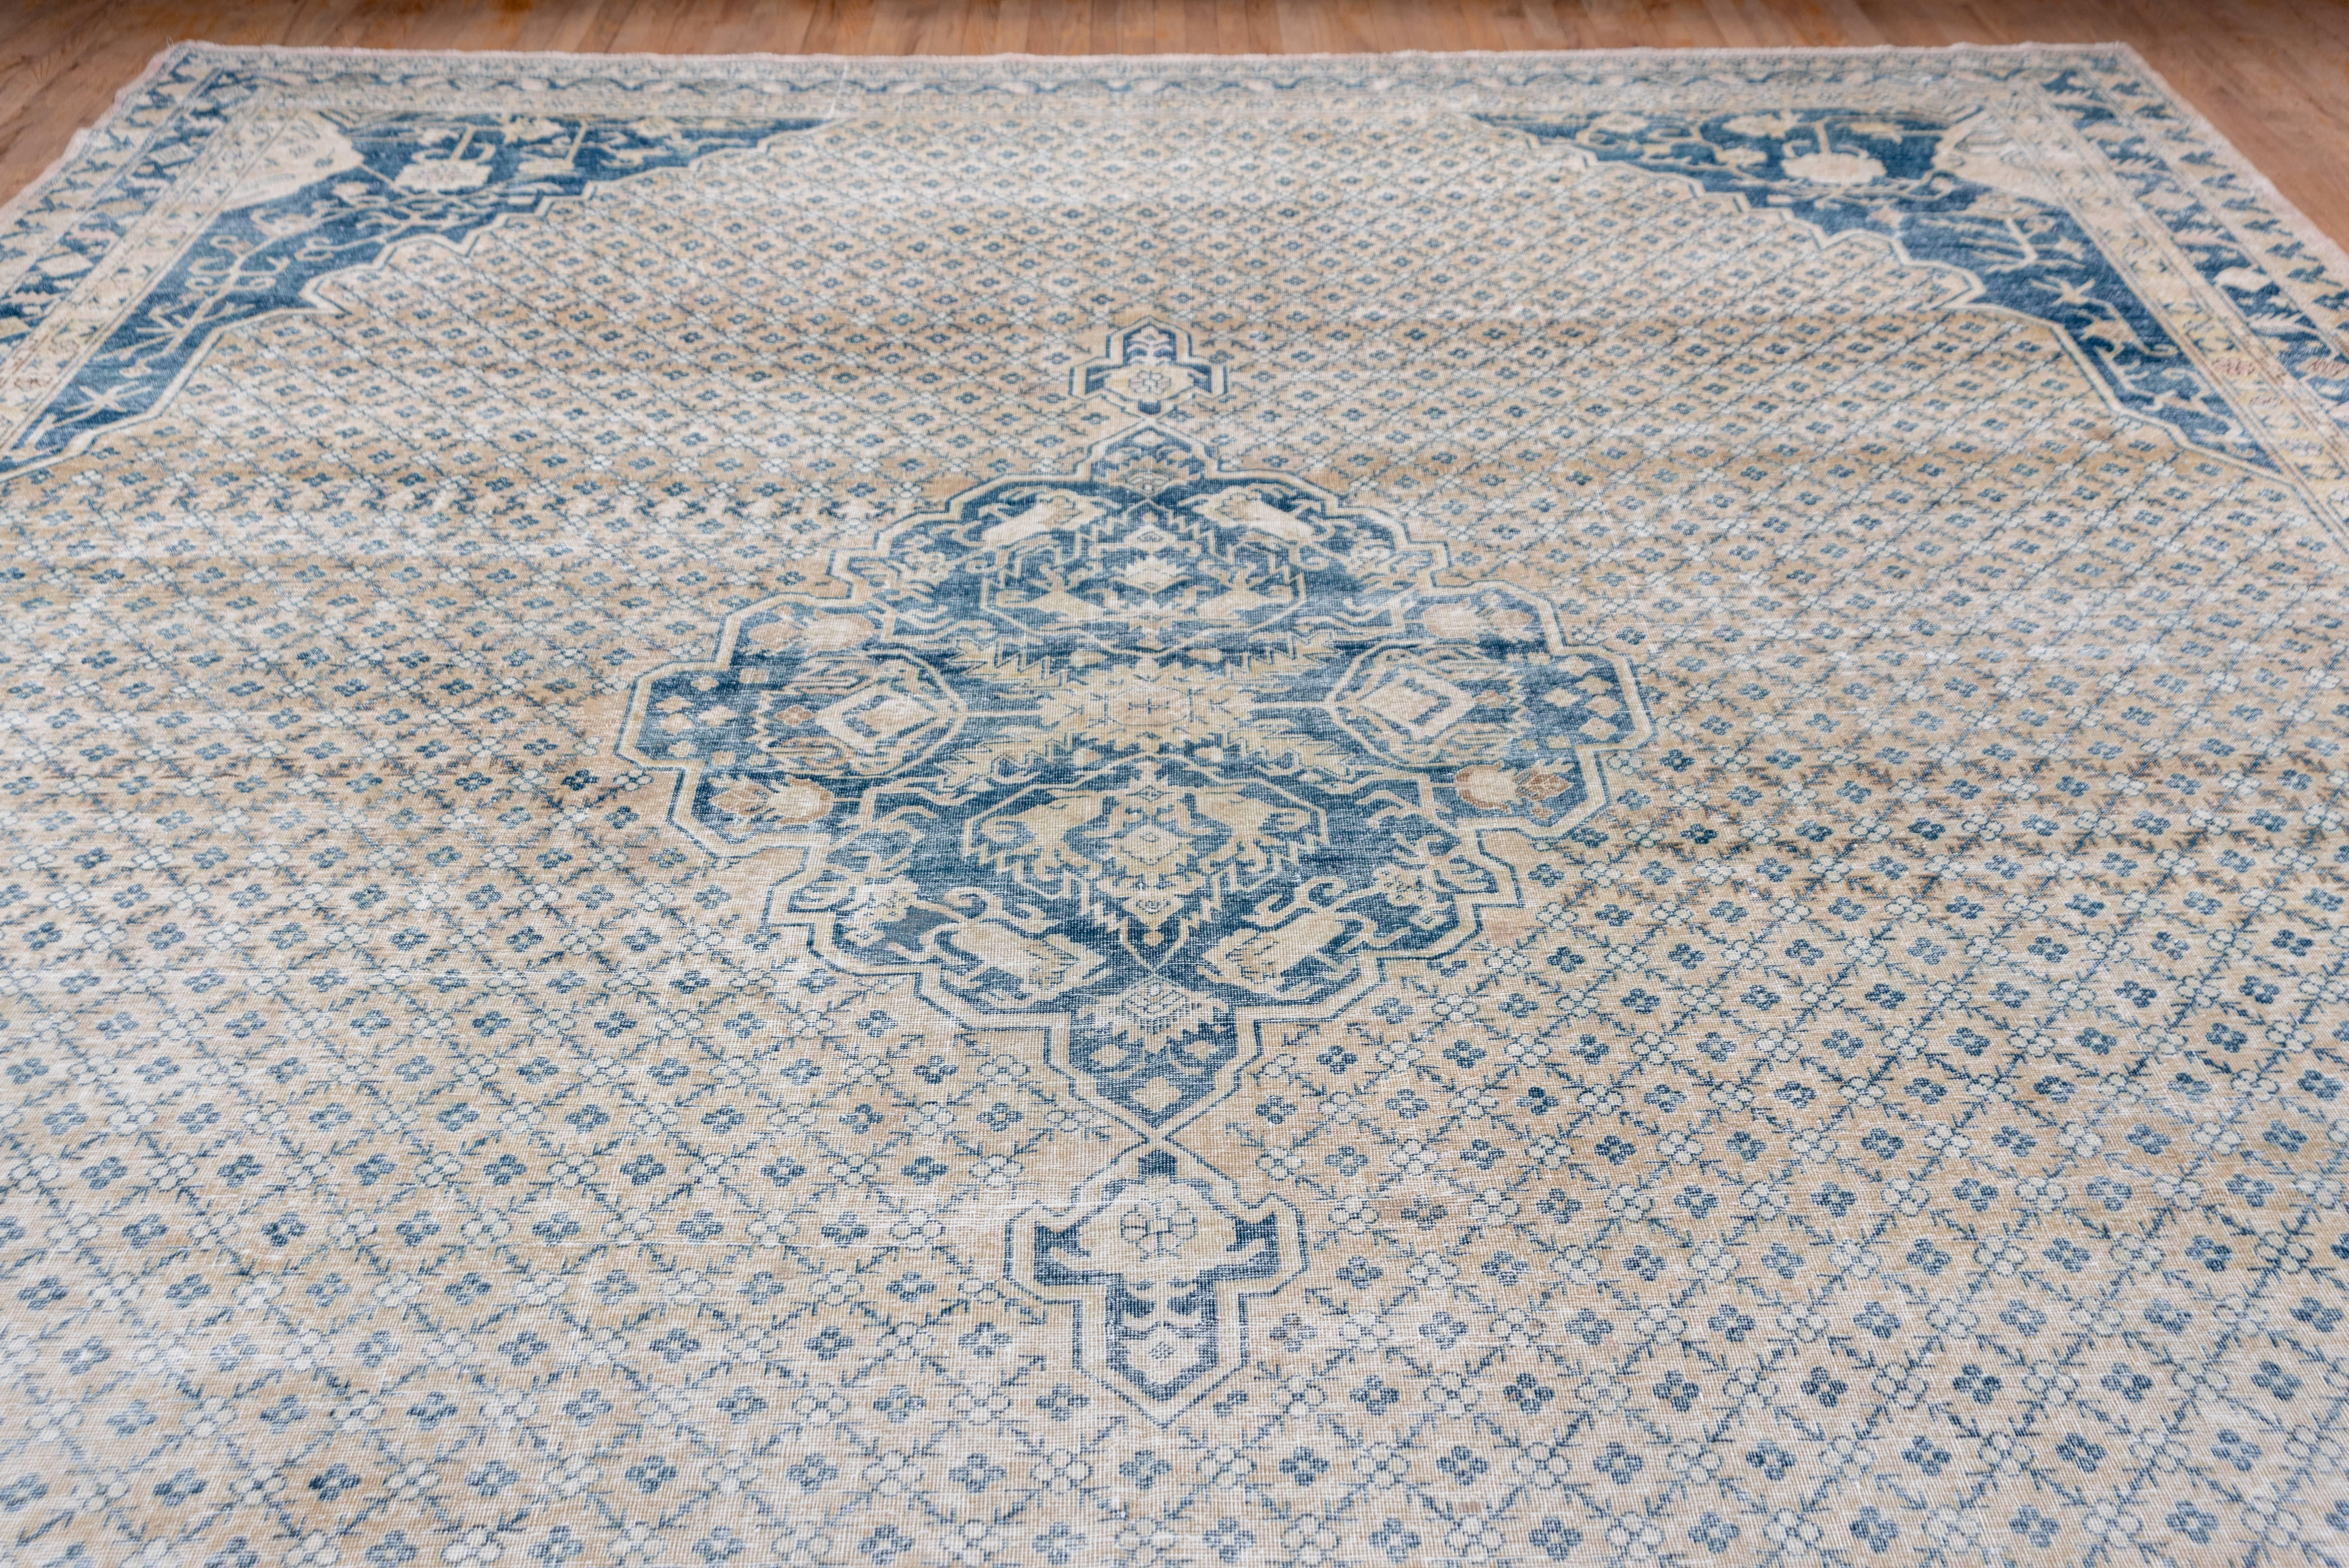 This unusual west Persian carpet has an essentially bitonal character with a central scalloped ogival blue medallion set on a small lattice field with diminutive four petal rosettes. The en suite to the medallion corners have a bold vinery and